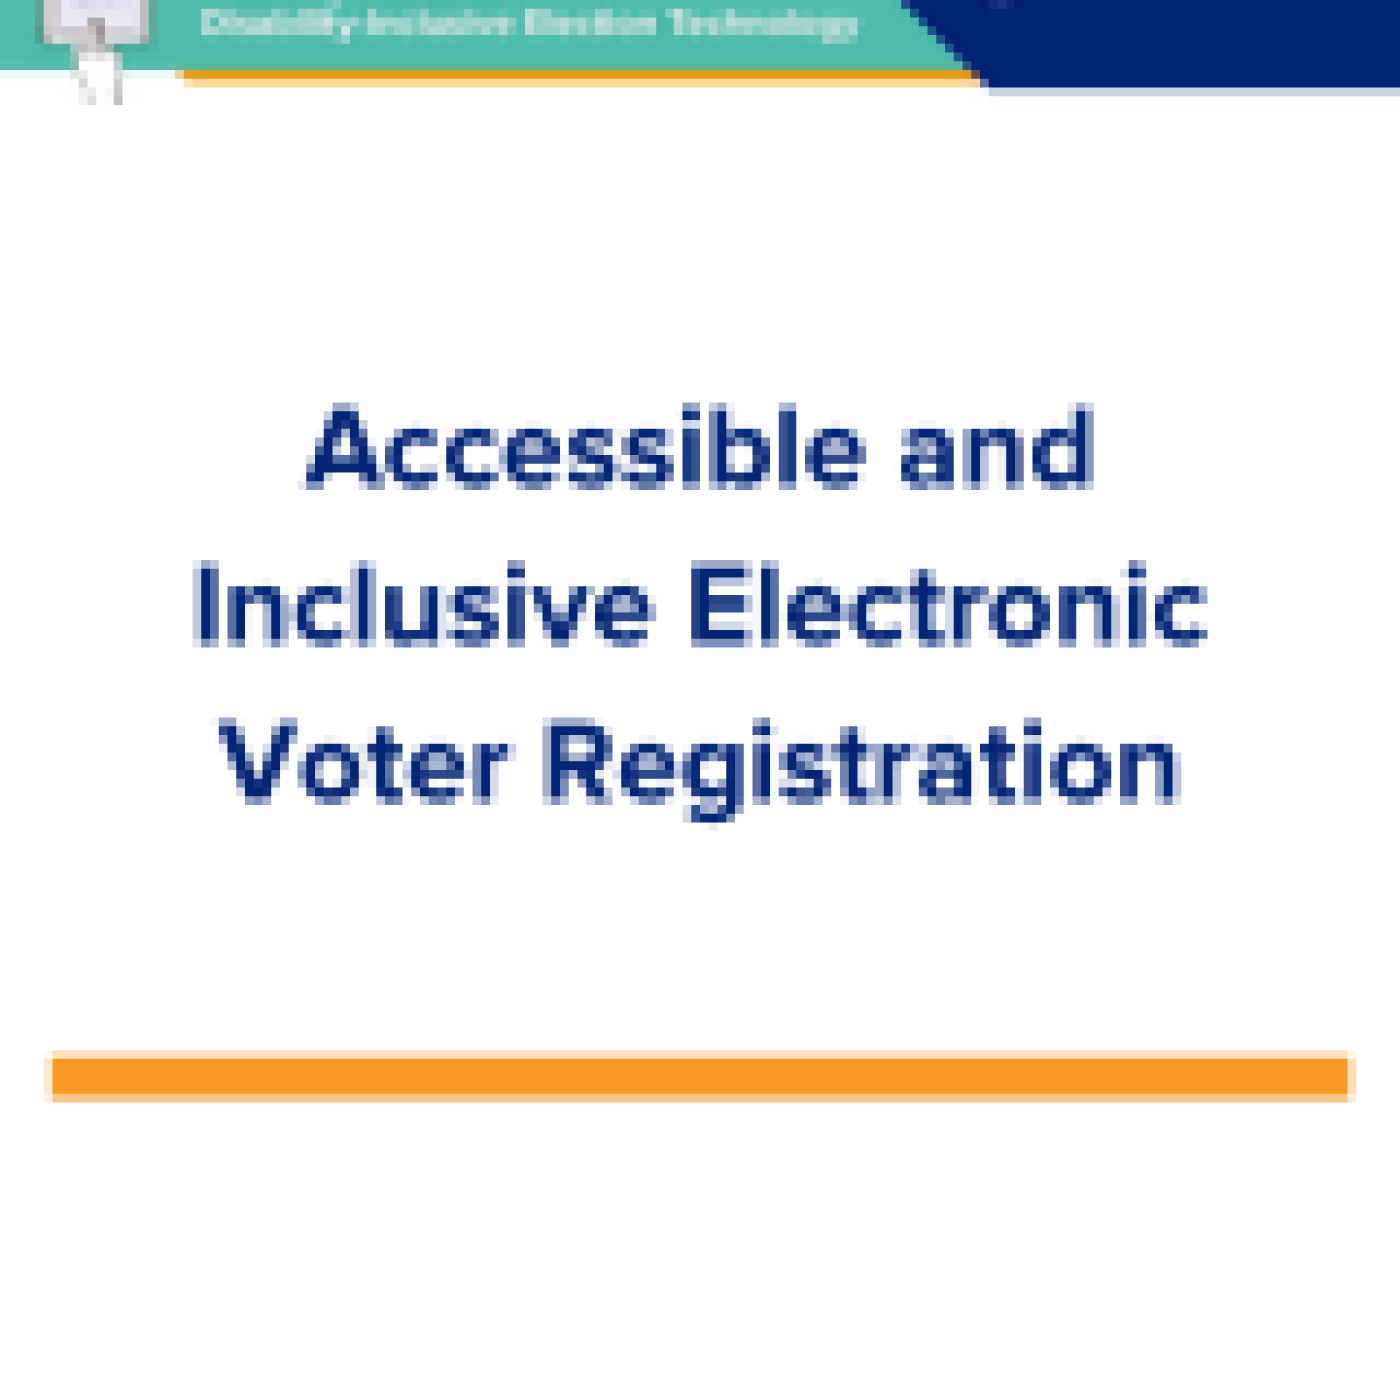 Accessible and Inclusive Electronic Voter Registration